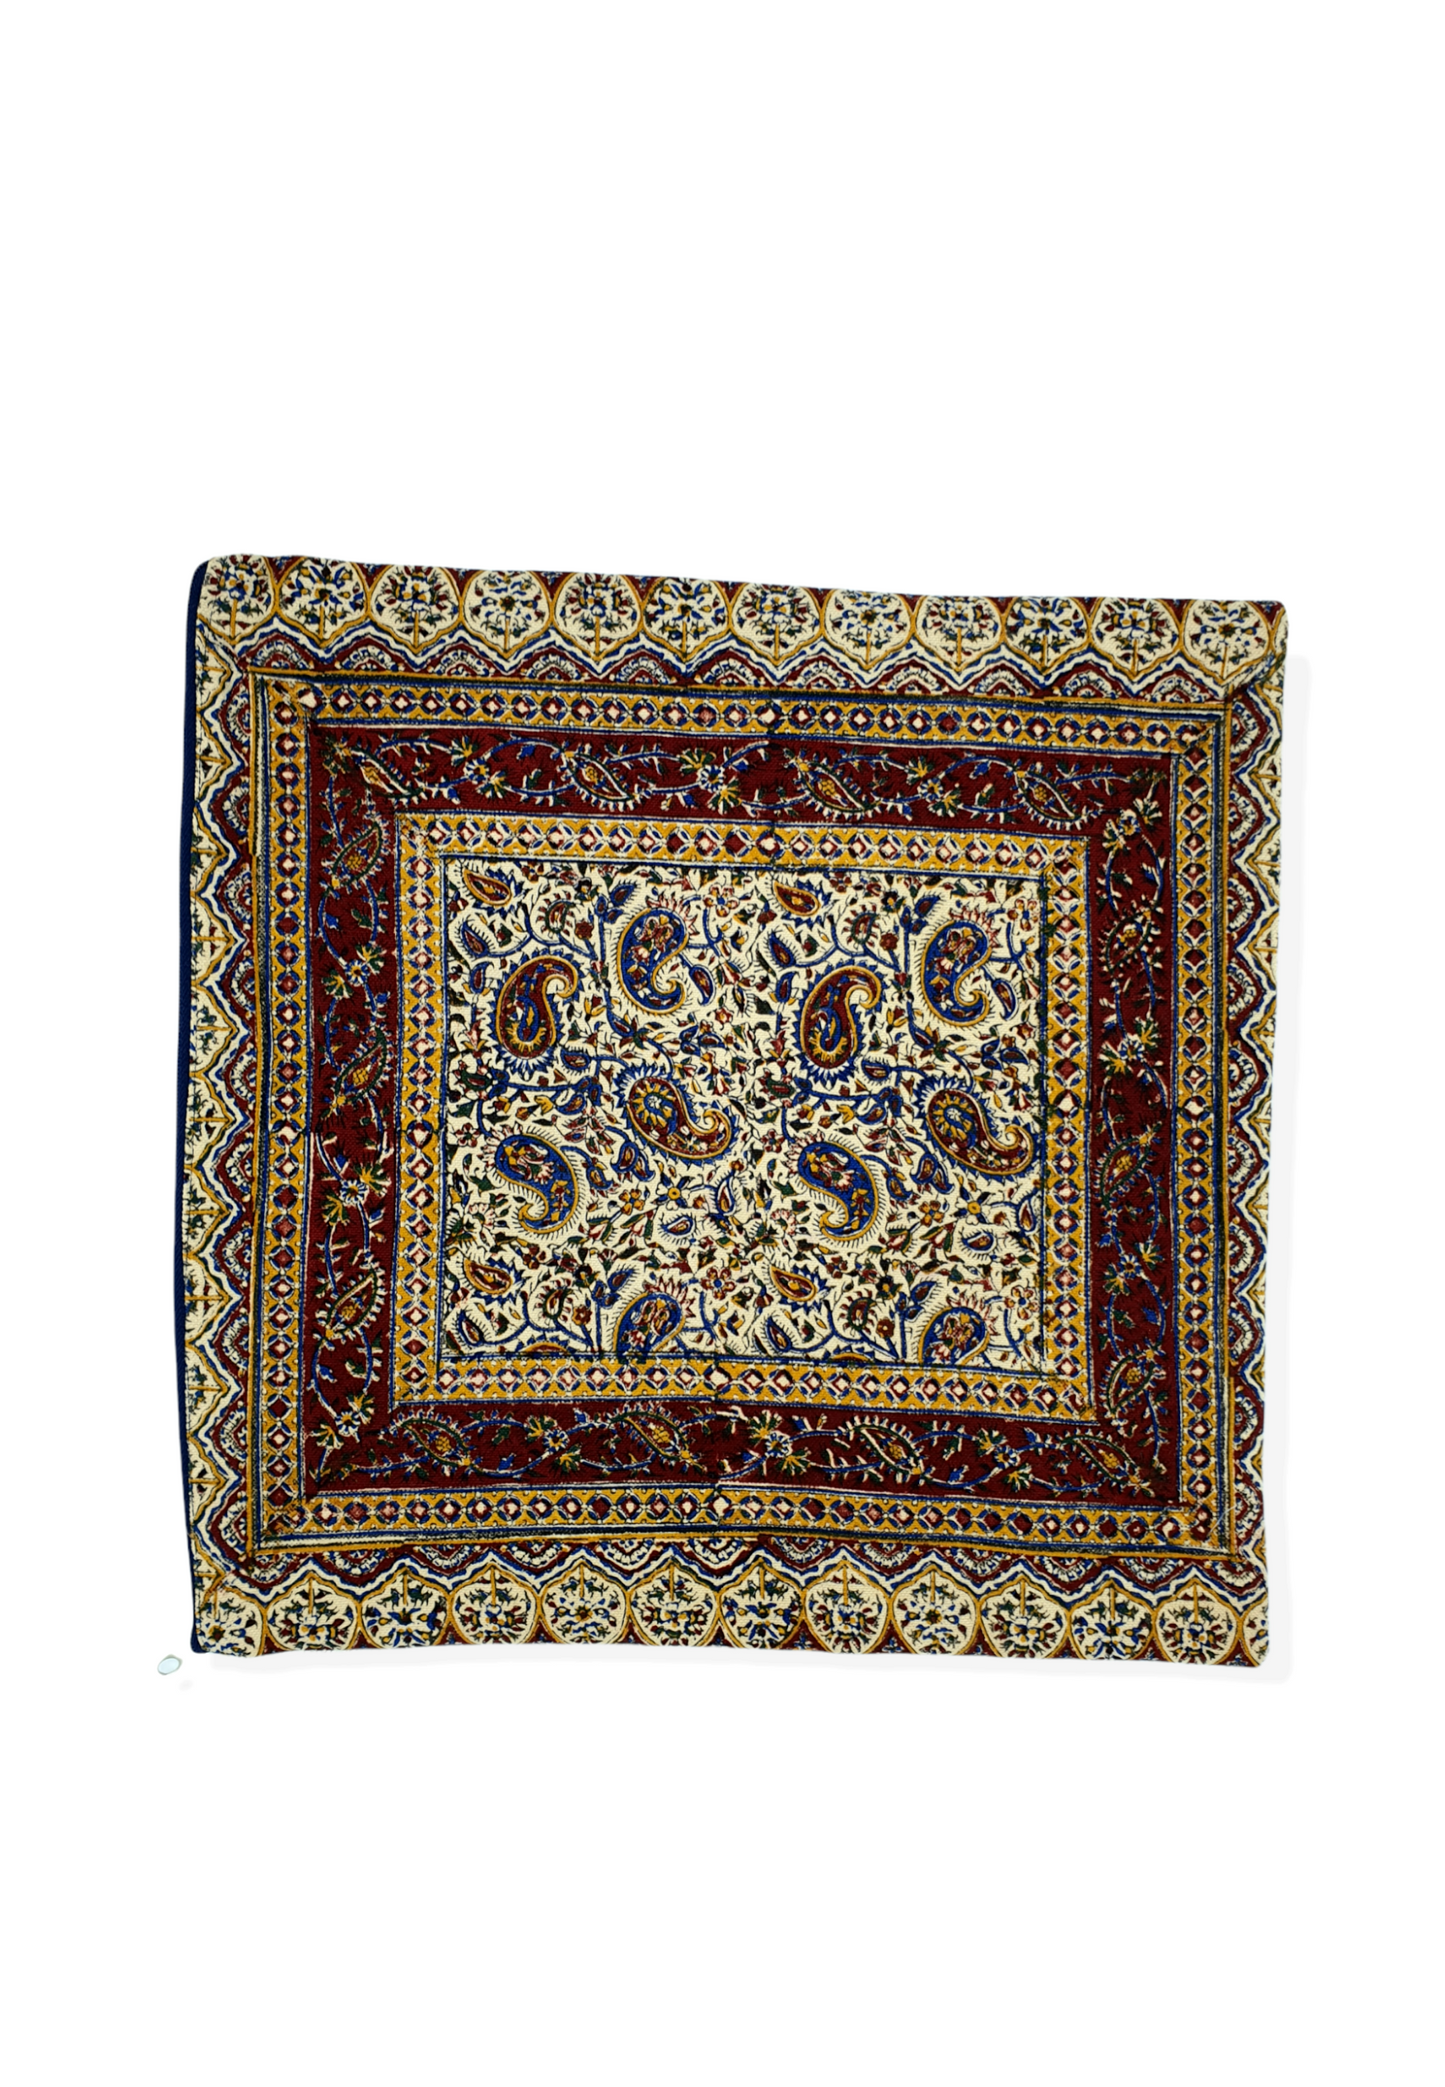 AFROZAN Hand-printed Cushion Cover - Peisly Bordeaux